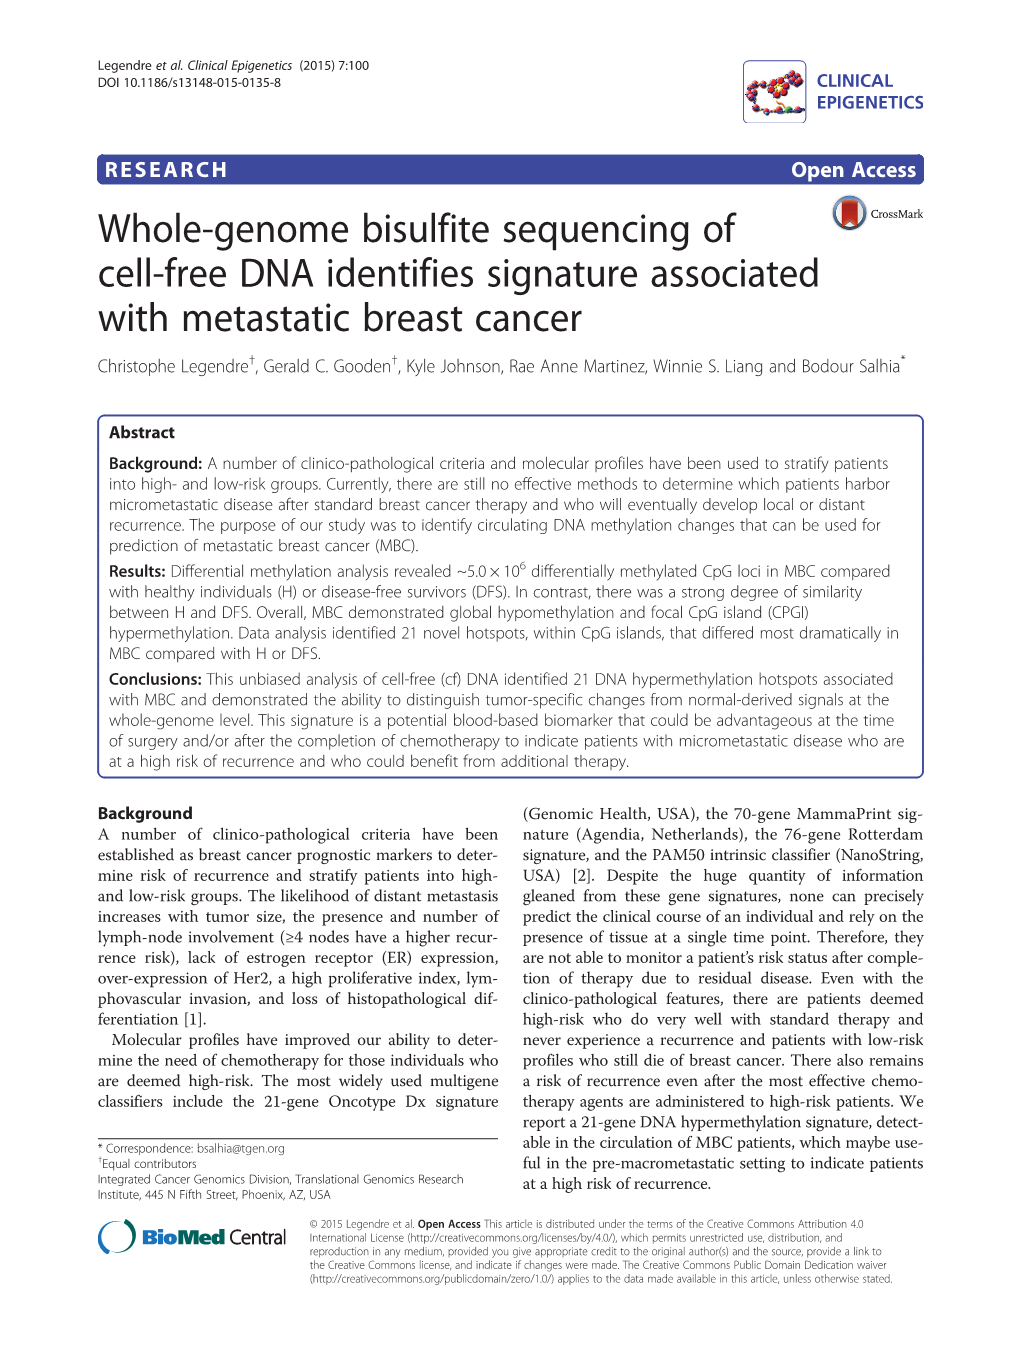 Whole-Genome Bisulfite Sequencing of Cell-Free DNA Identifies Signature Associated with Metastatic Breast Cancer Christophe Legendre†, Gerald C